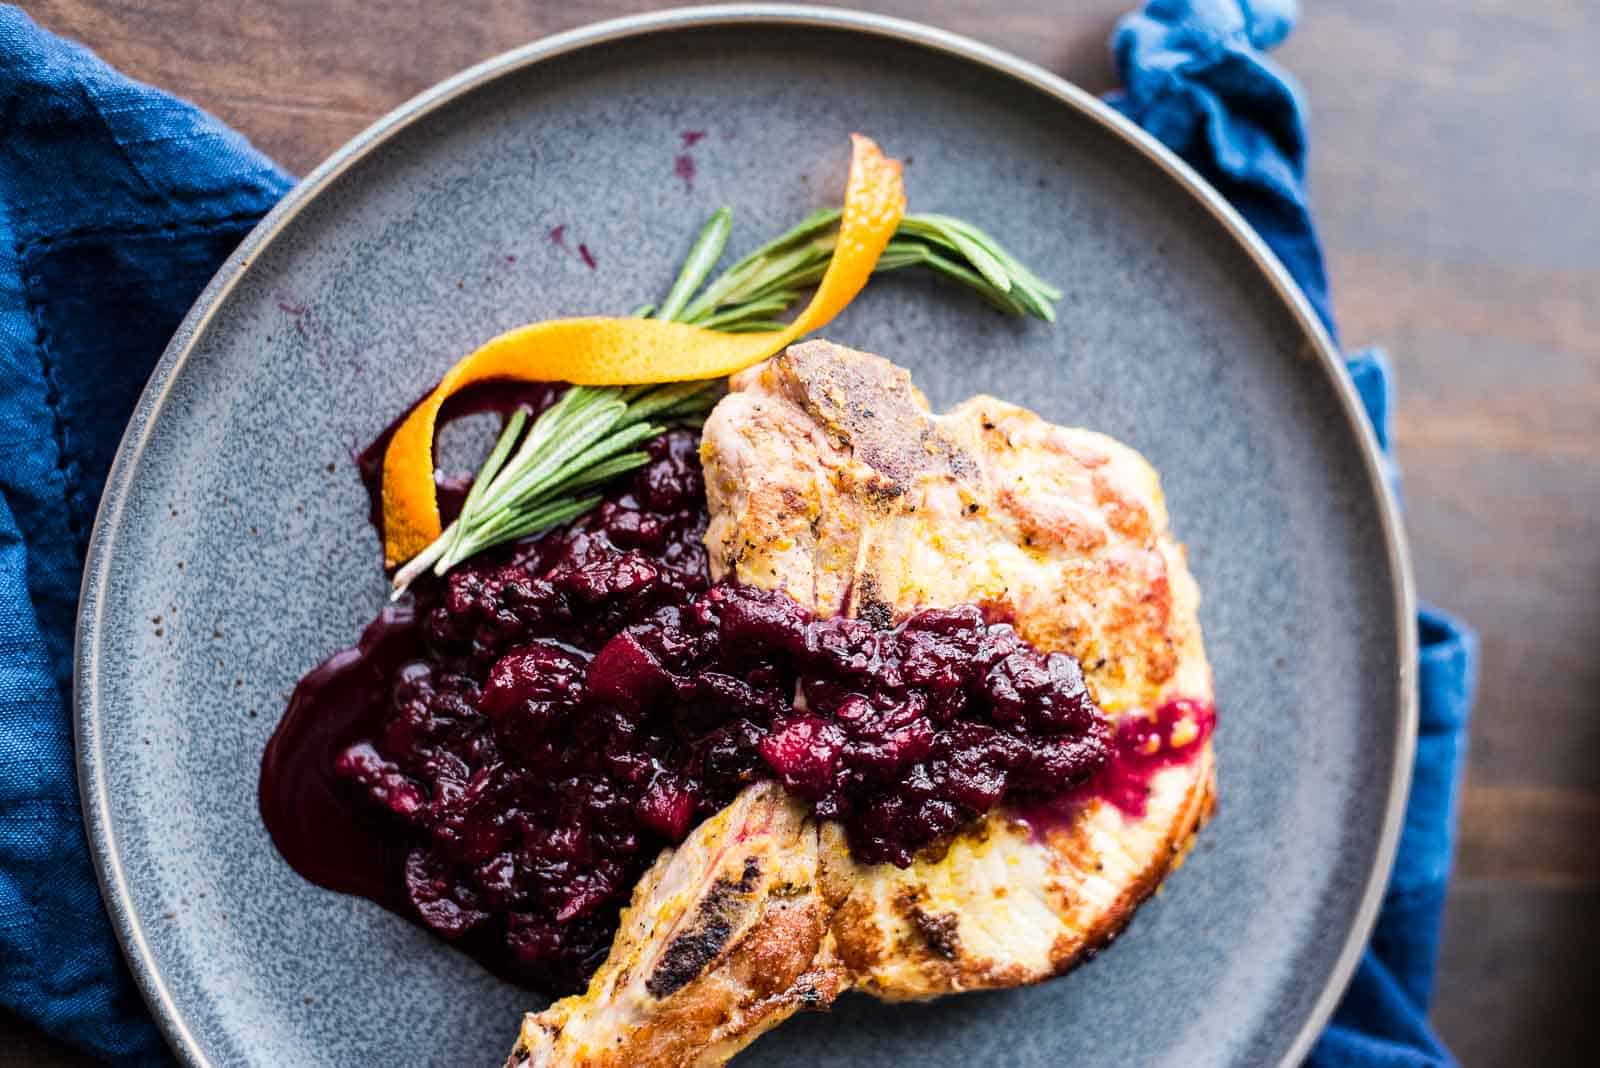 Pork chops with blackberry applesauce on a gray plate.